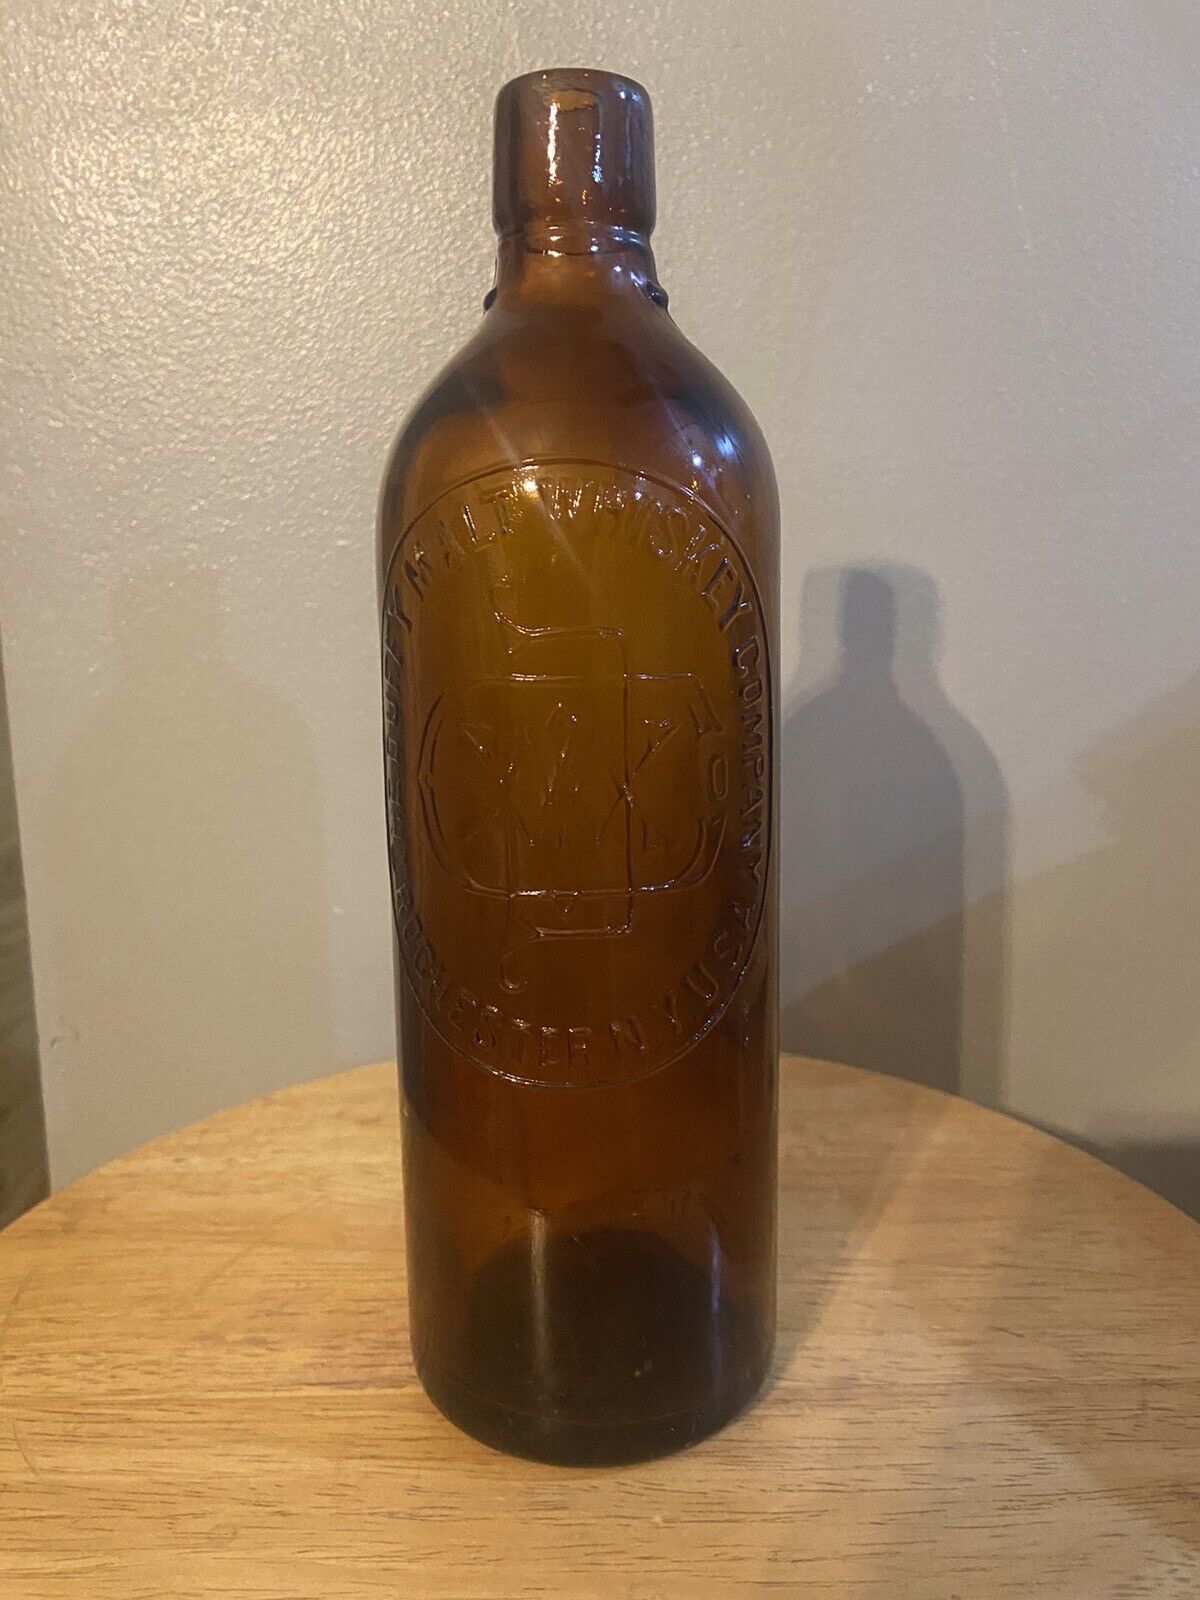 ANTIQUE DUFFY MALT WHISKEY CO BOTTLE PAT’D Aug 24 1886 AMBER FIFTH Rochester NY